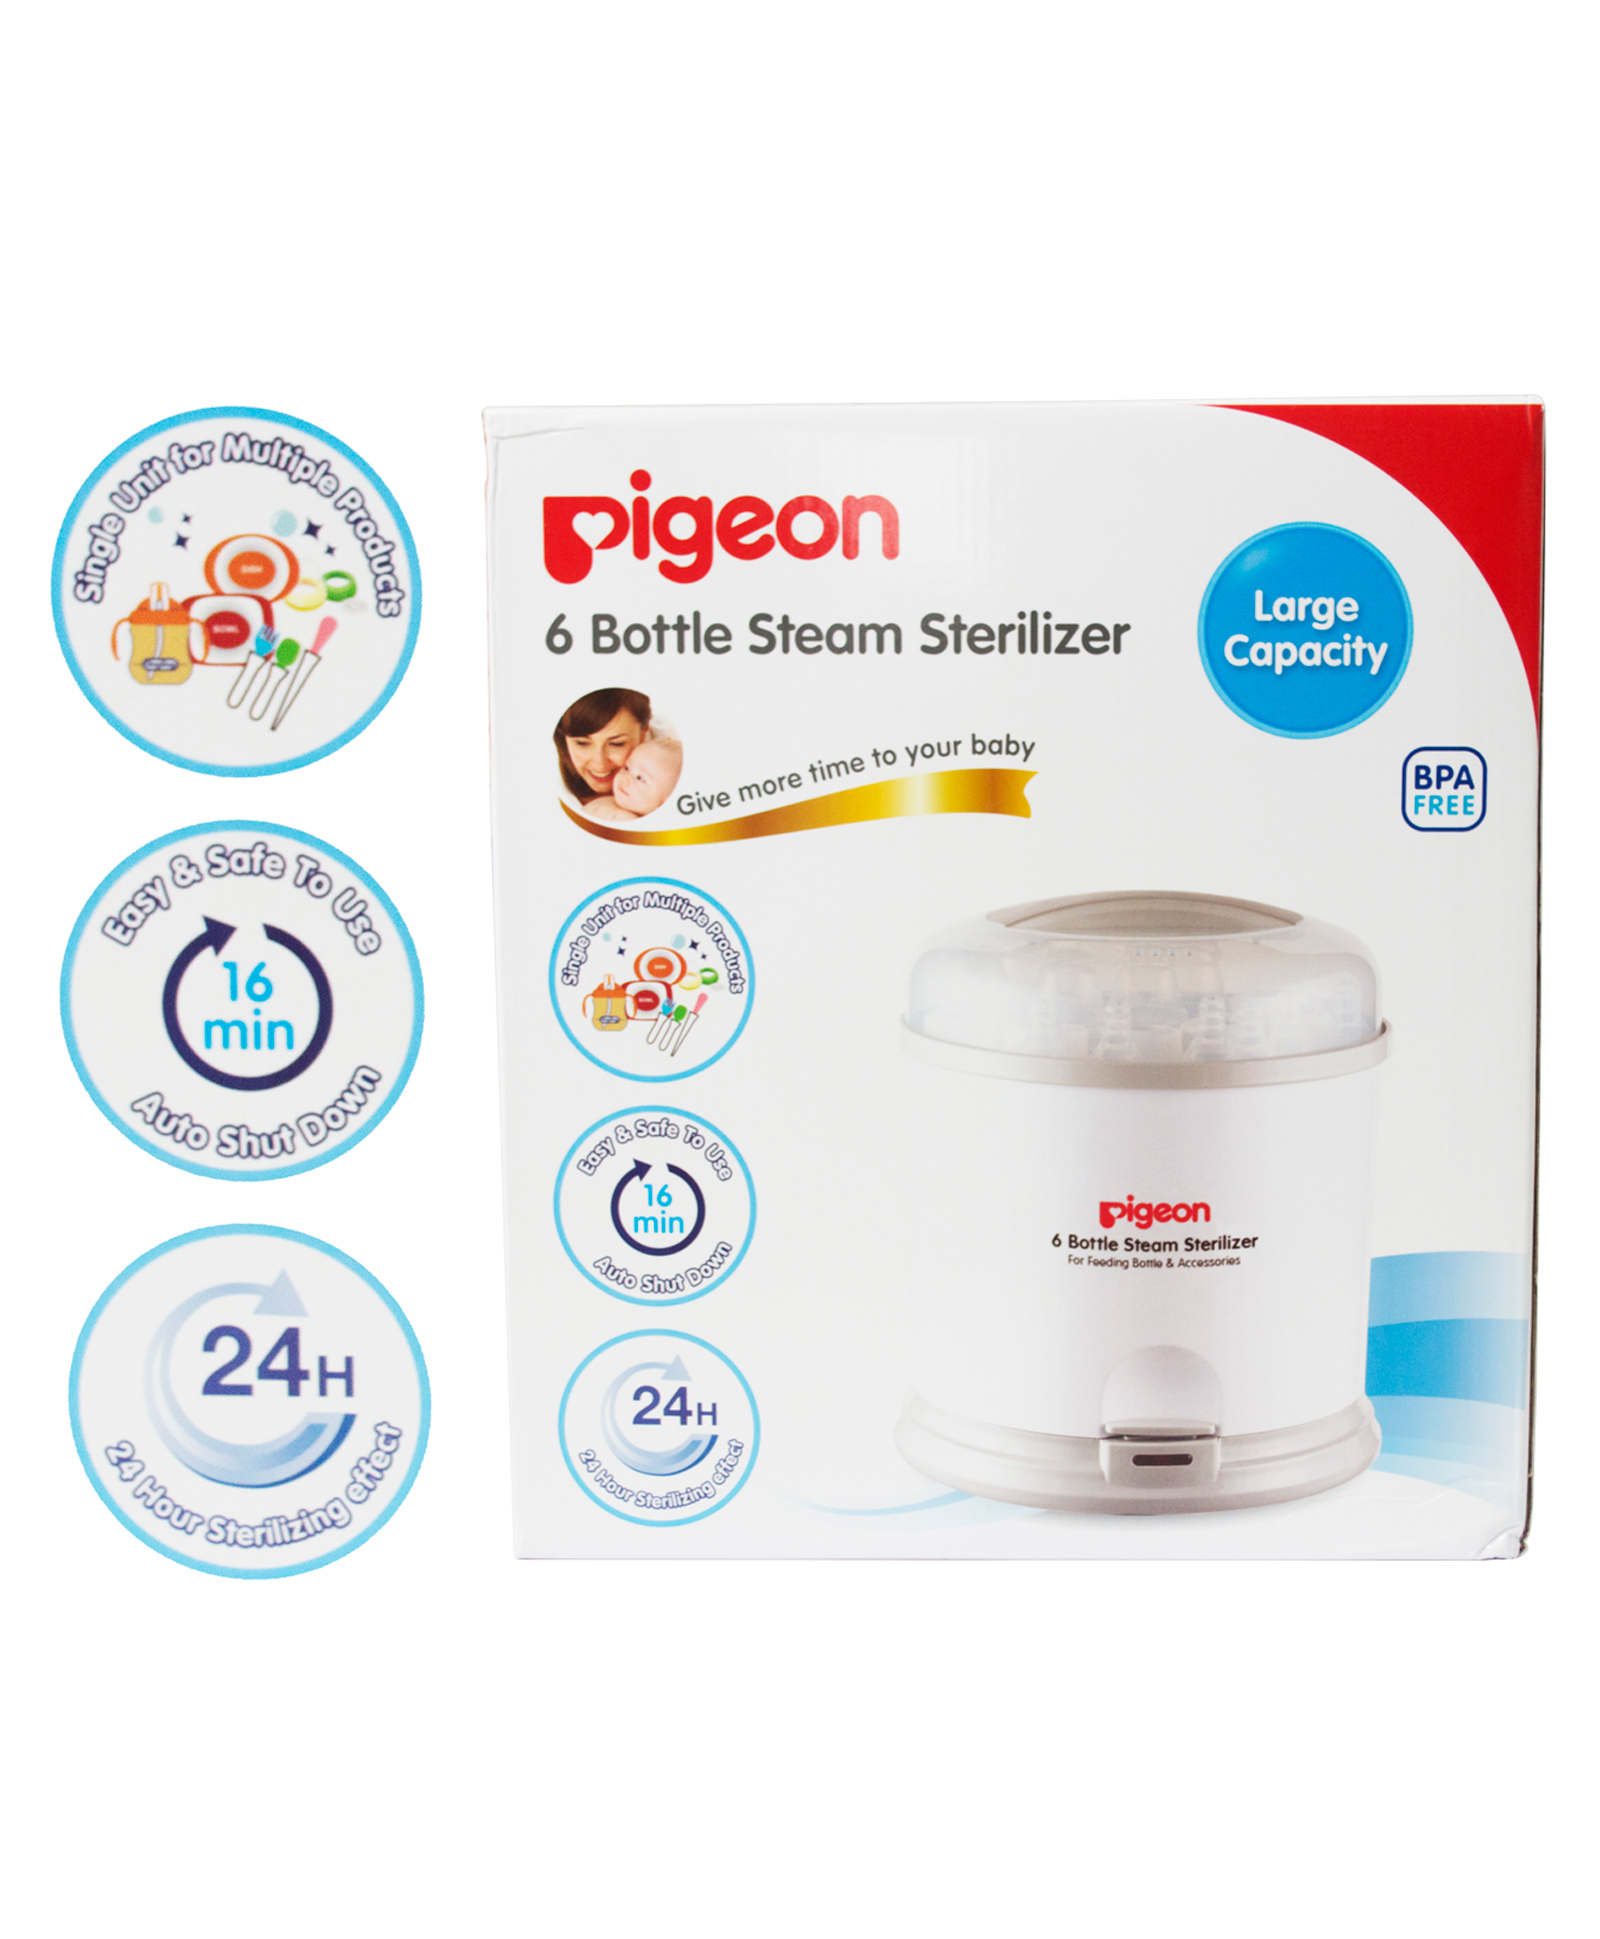 pigeon multifunction sterilizer review